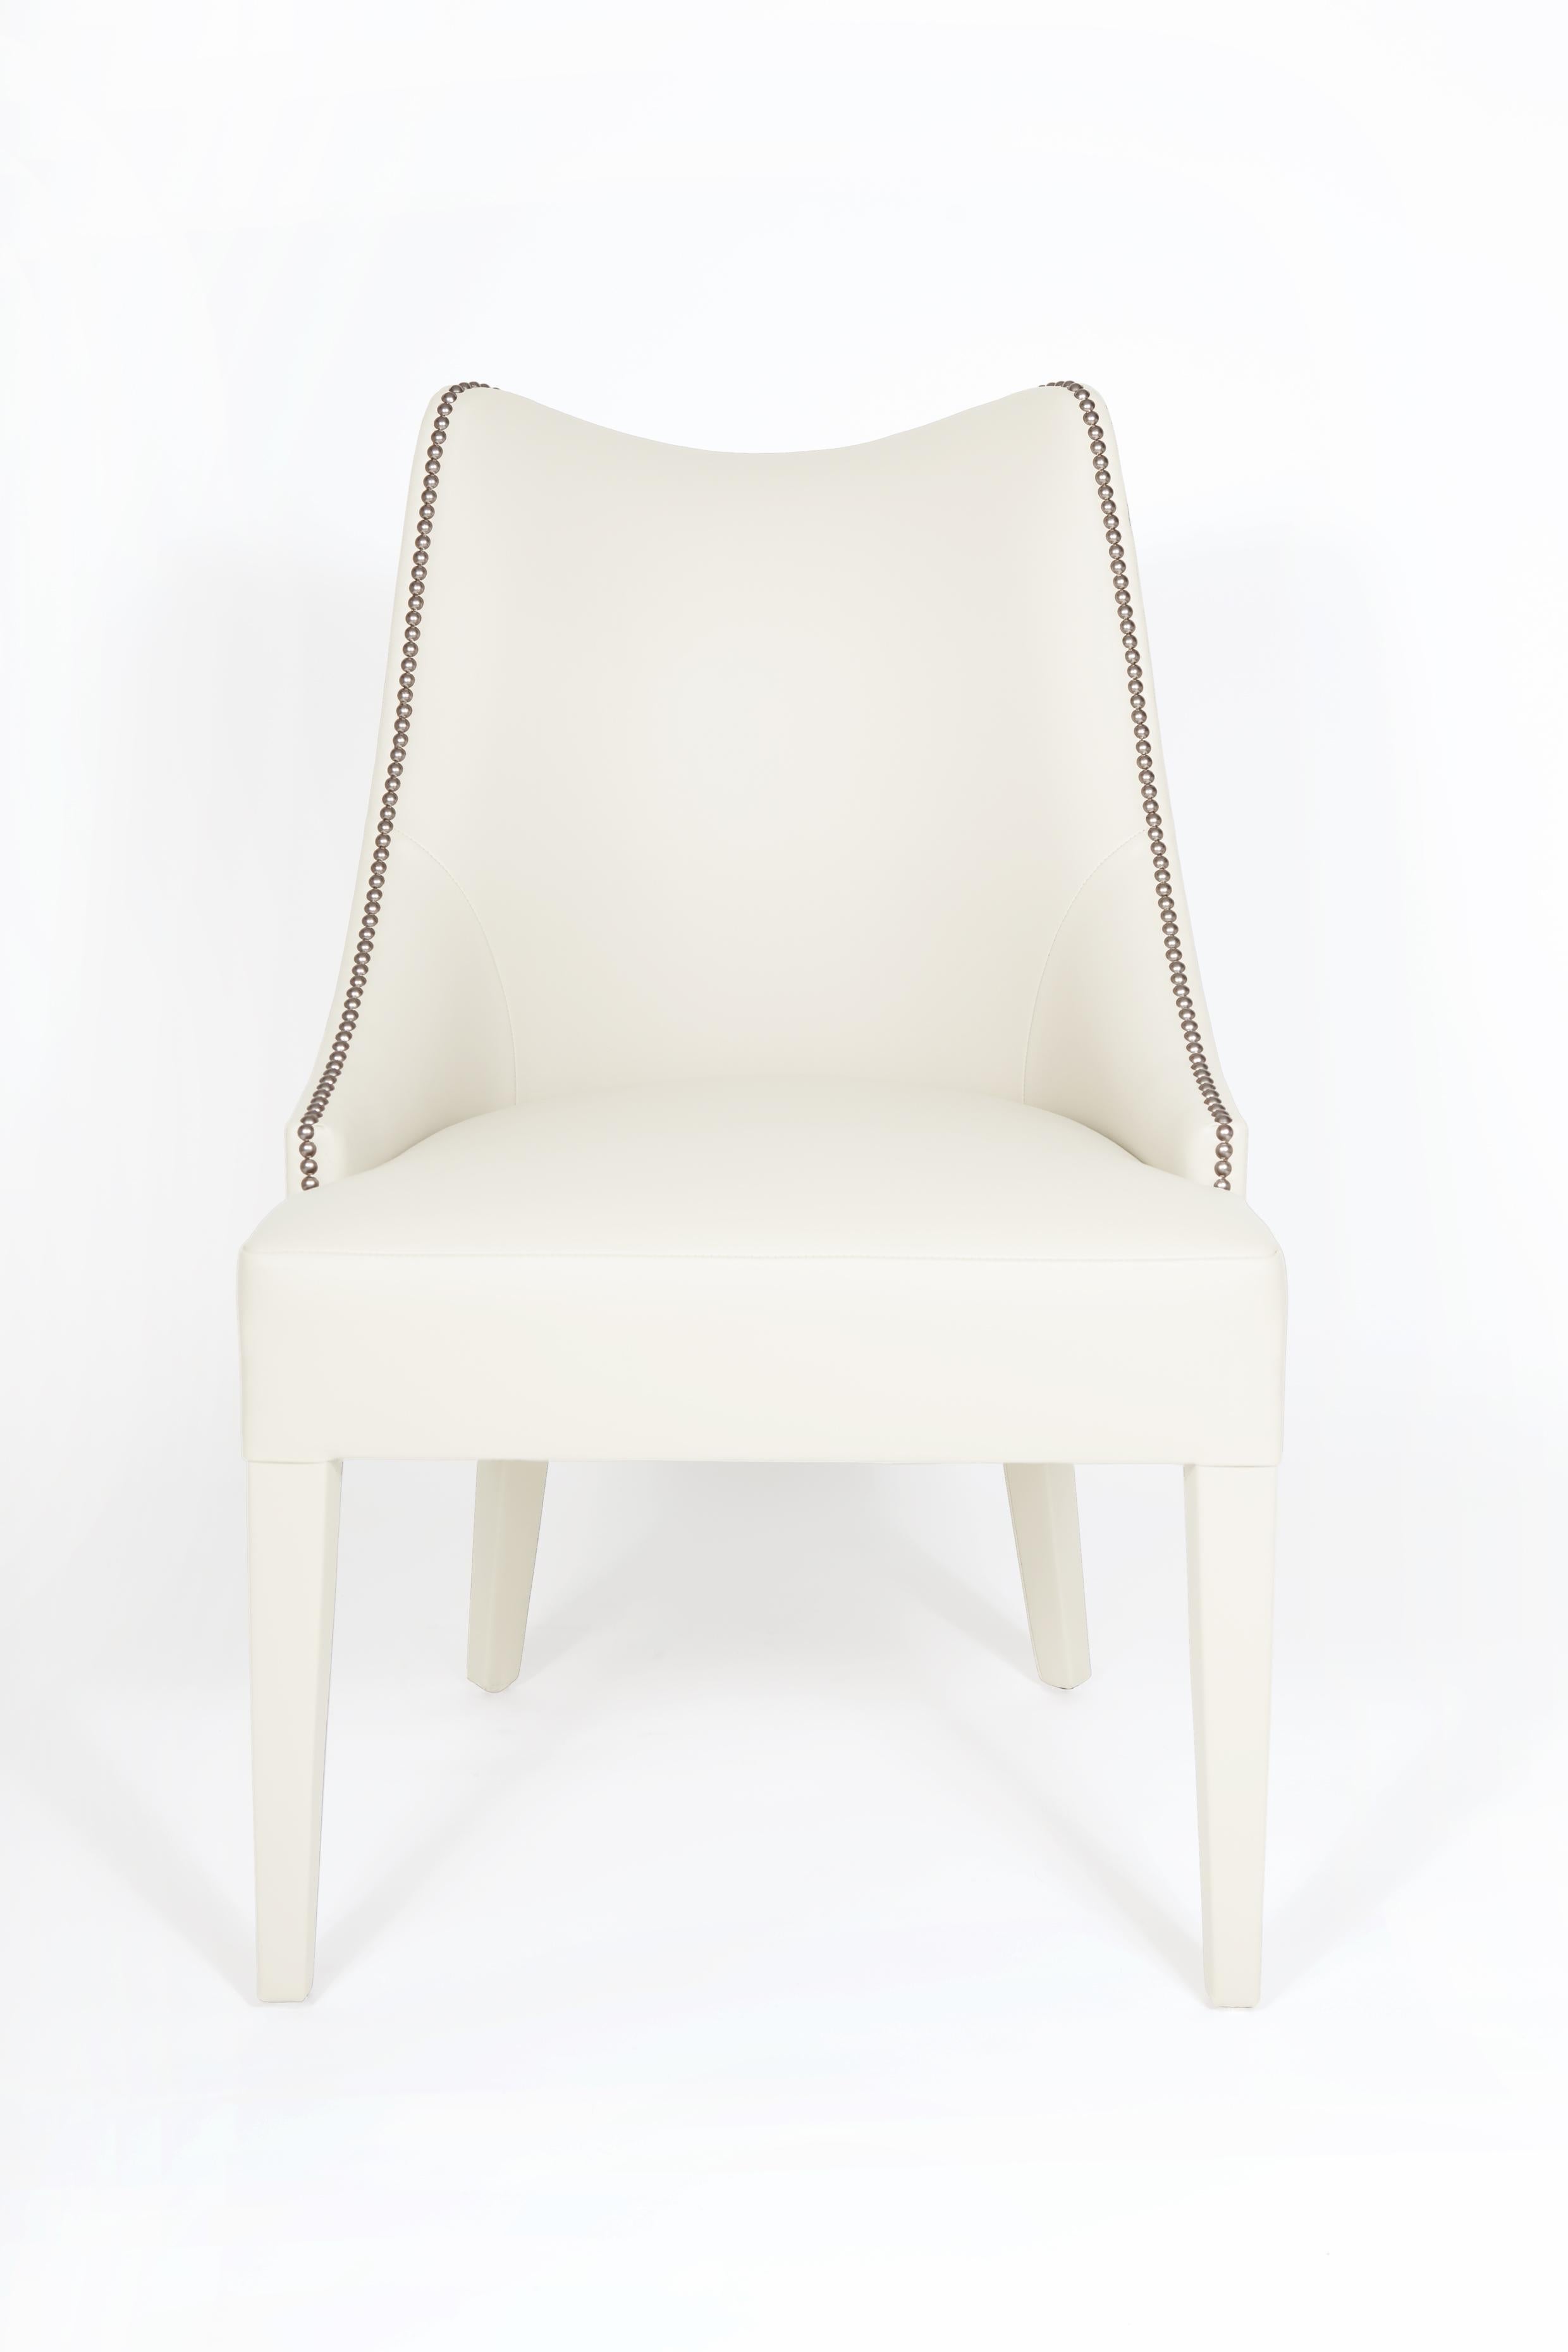 Contemporary Modern Classic Dining Chairs with Nail Trim Detailing By Munna Design For Sale